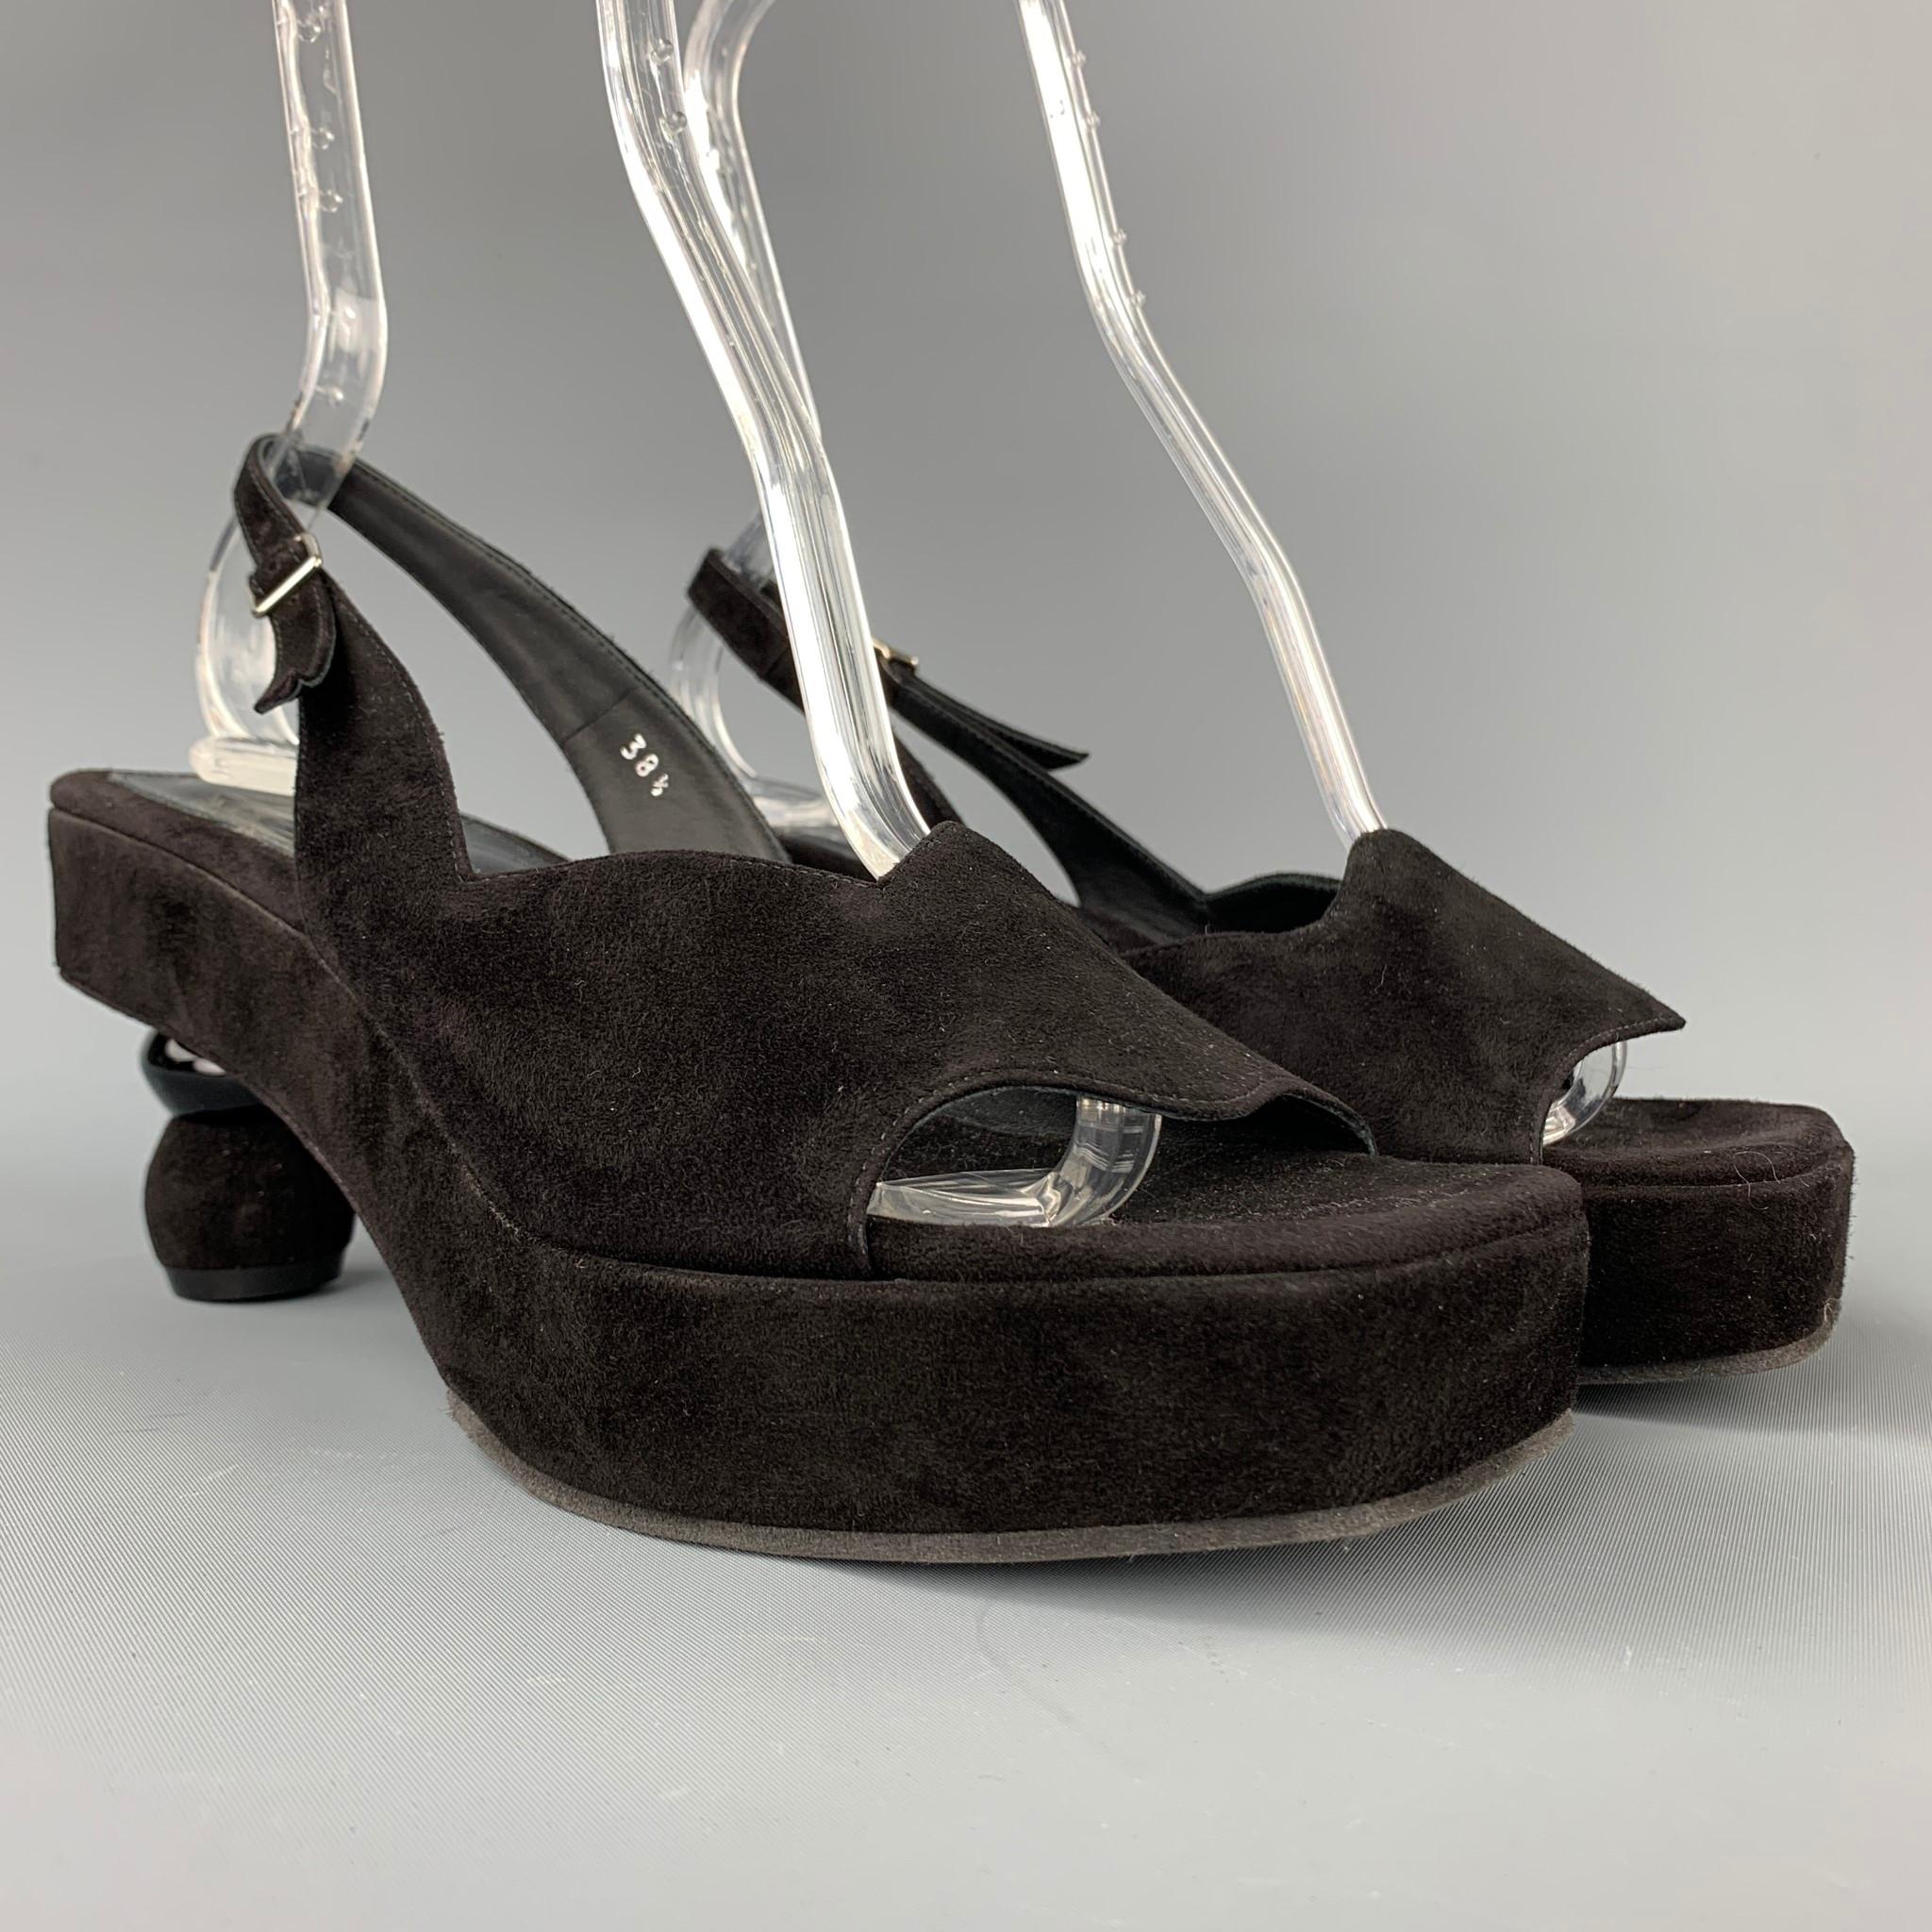 DRIES VAN NOTEN sandals comes in a black velvet featuring a platform style, chunky circle heel, and a slingback closure. Made in Italy.

Very Good Pre-Owned Condition.
Marked: EU 38.5

Measurements:

Platform: 1 in.
Heel: 2 in.